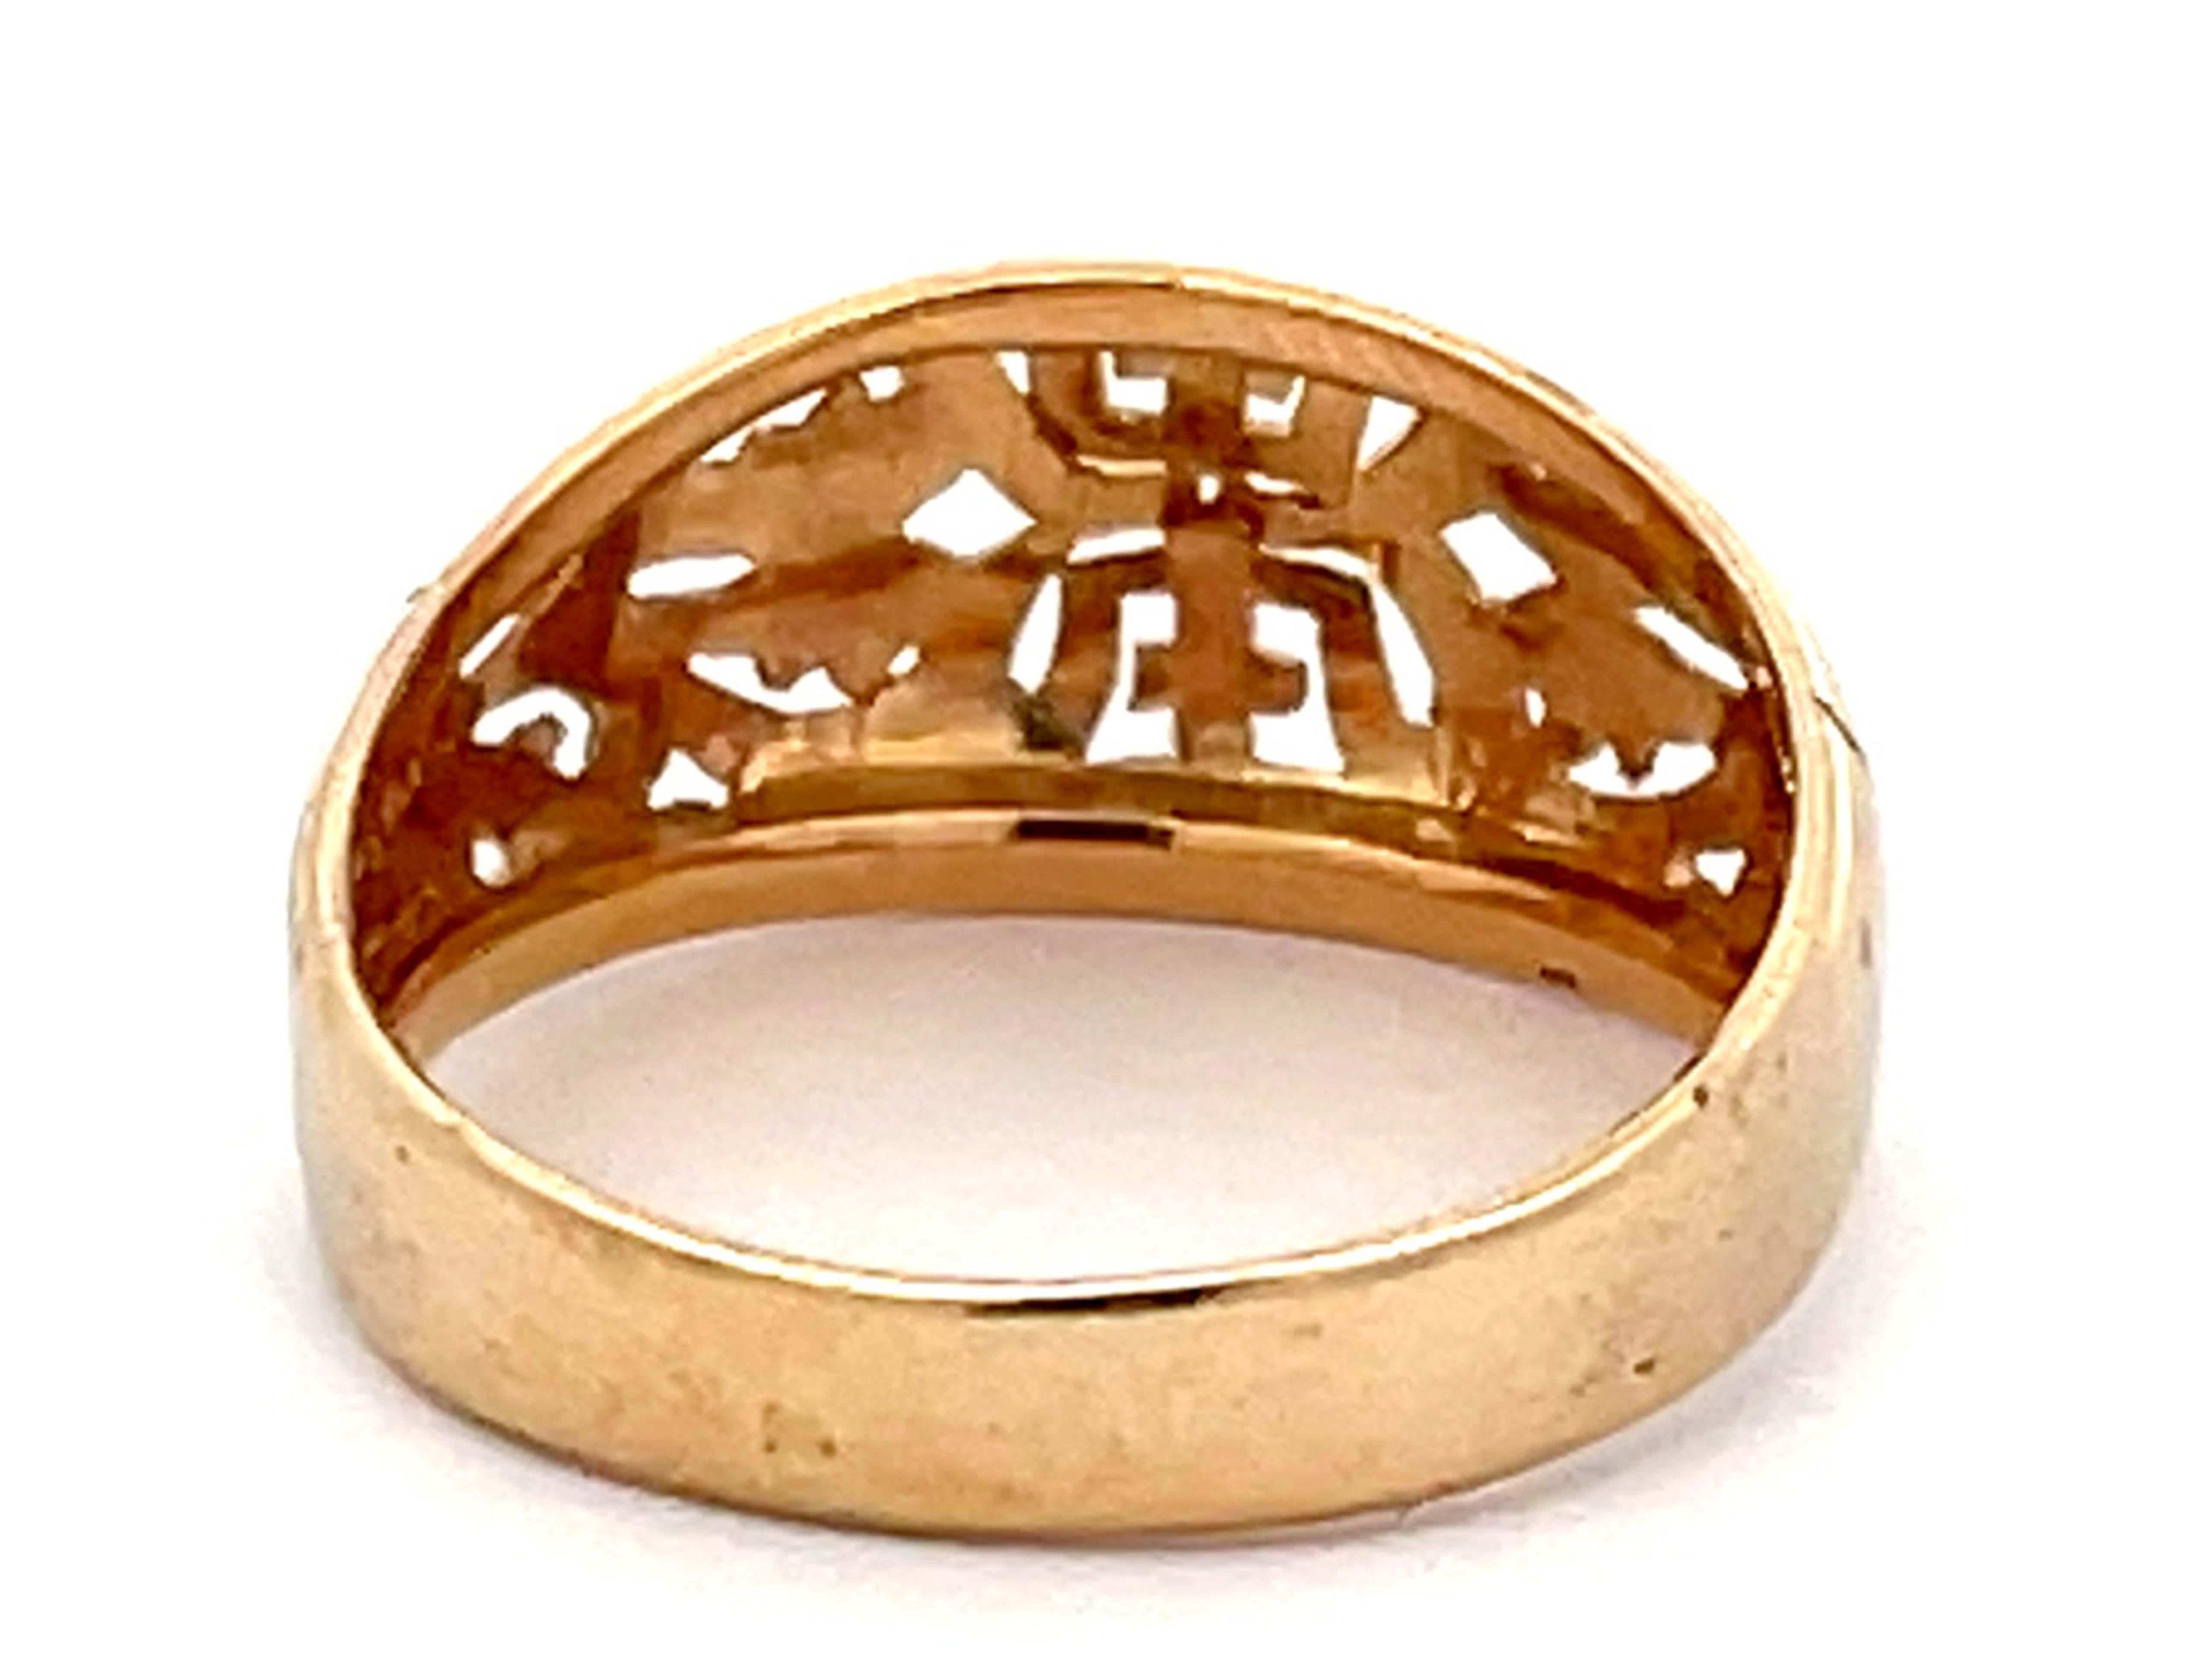 Mings Longevity Cutout Ring in 14k Yellow Gold In Excellent Condition For Sale In Honolulu, HI